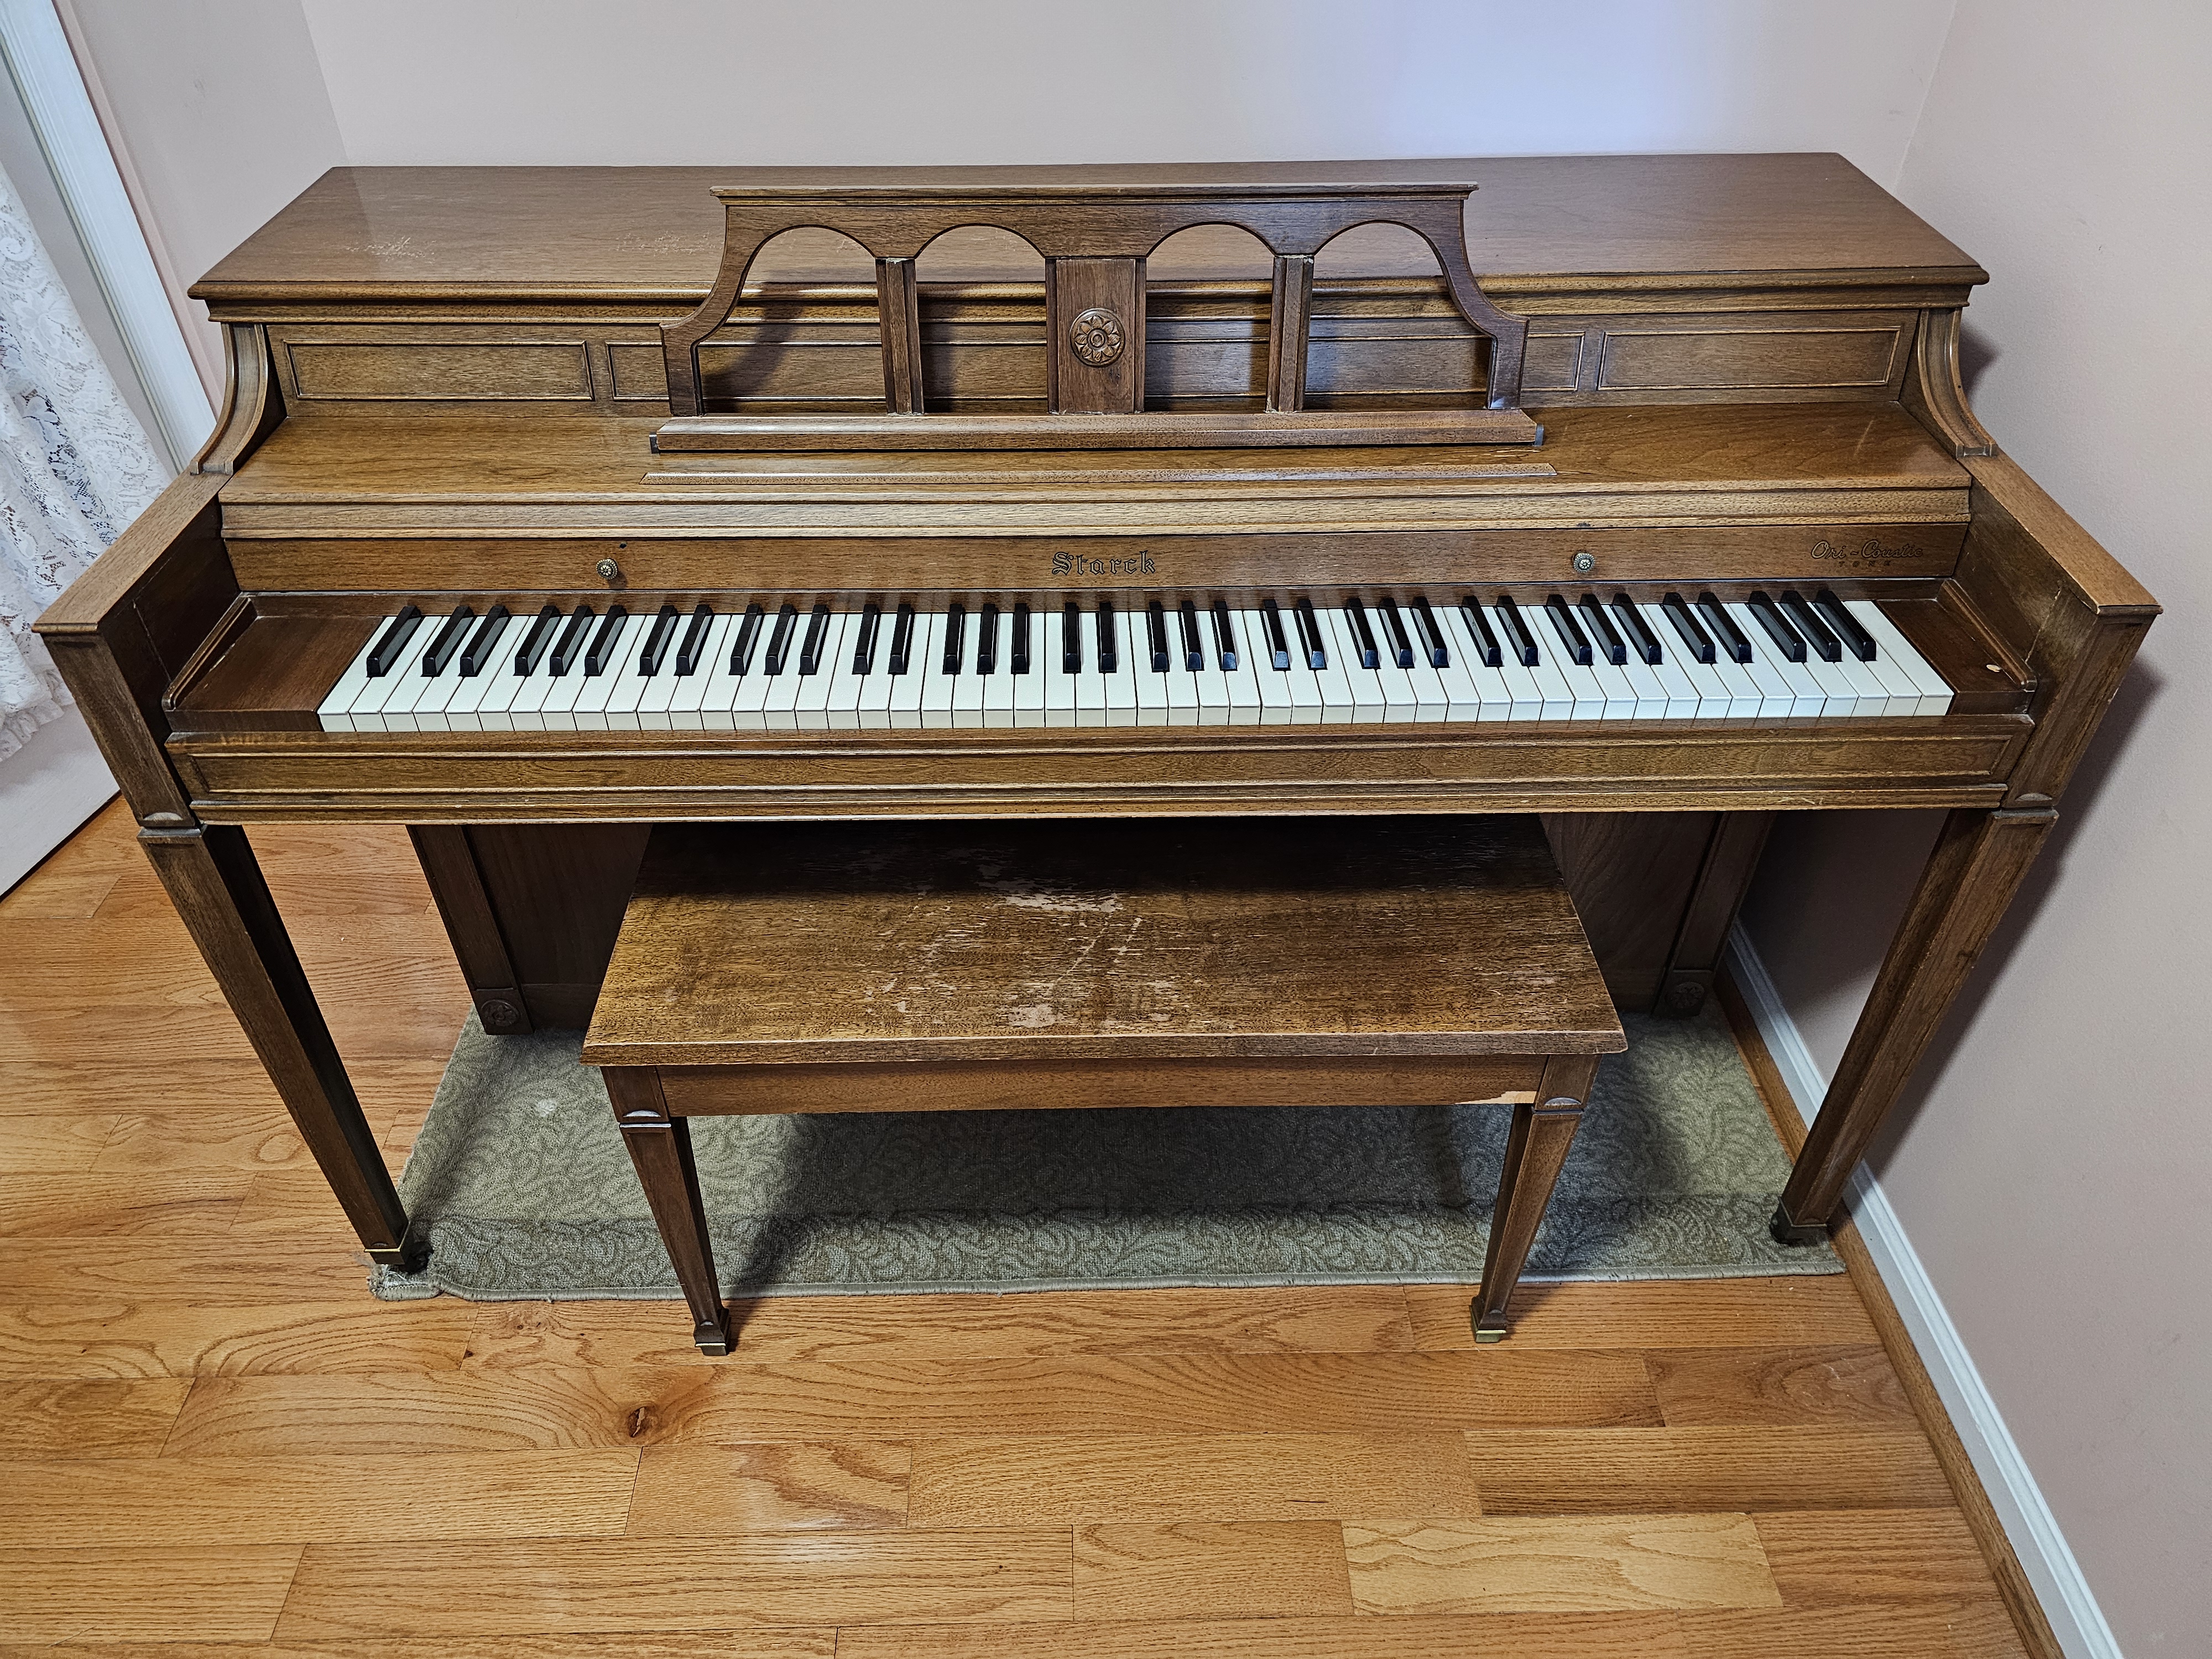 Upright piano for sale - great condition